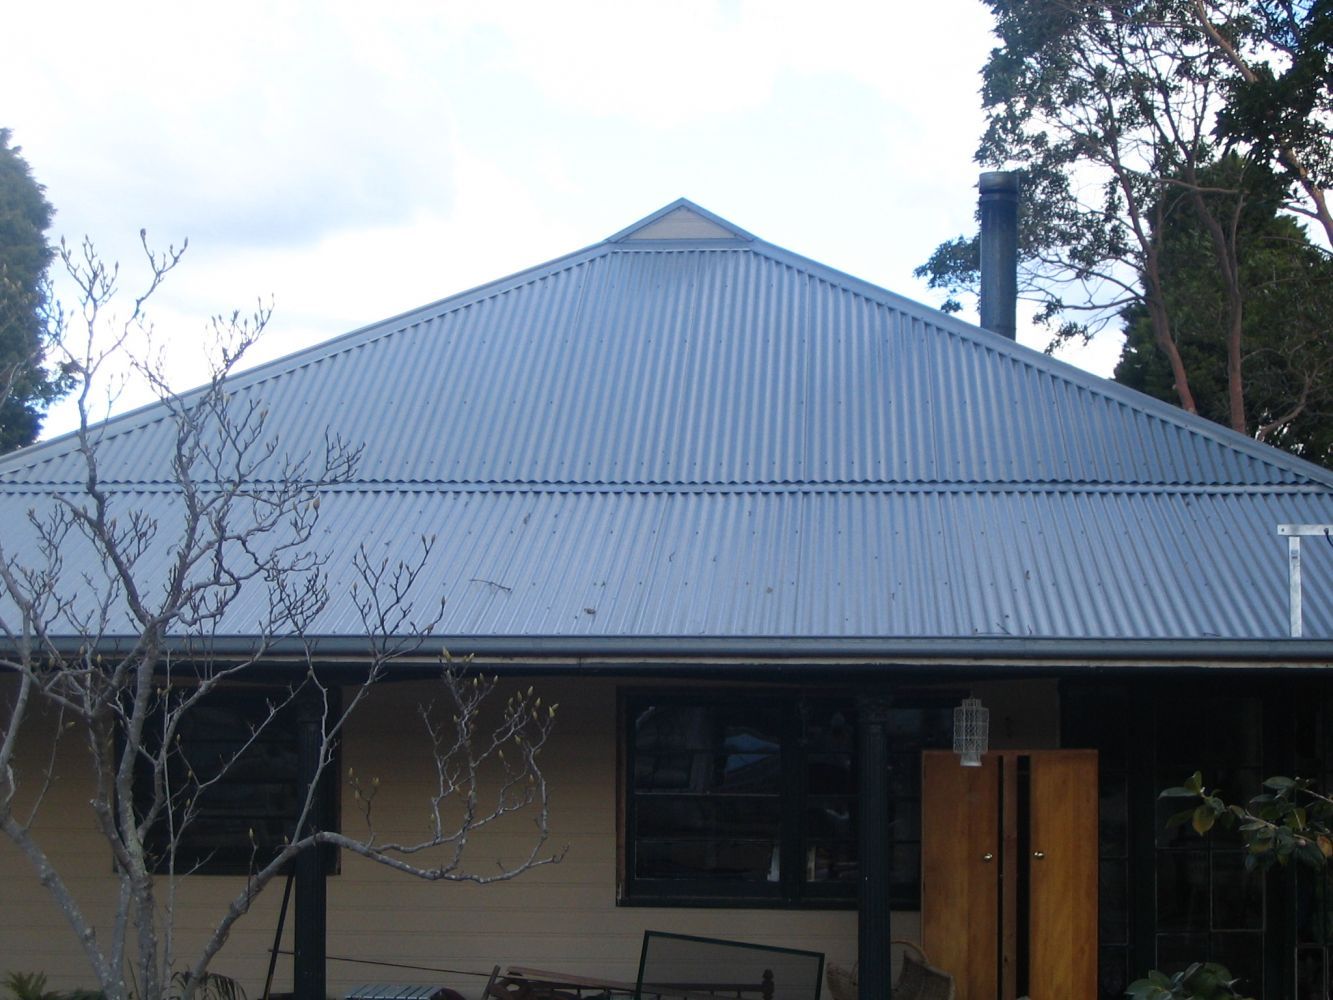 Completed roof thanks to roofing services in Sydney